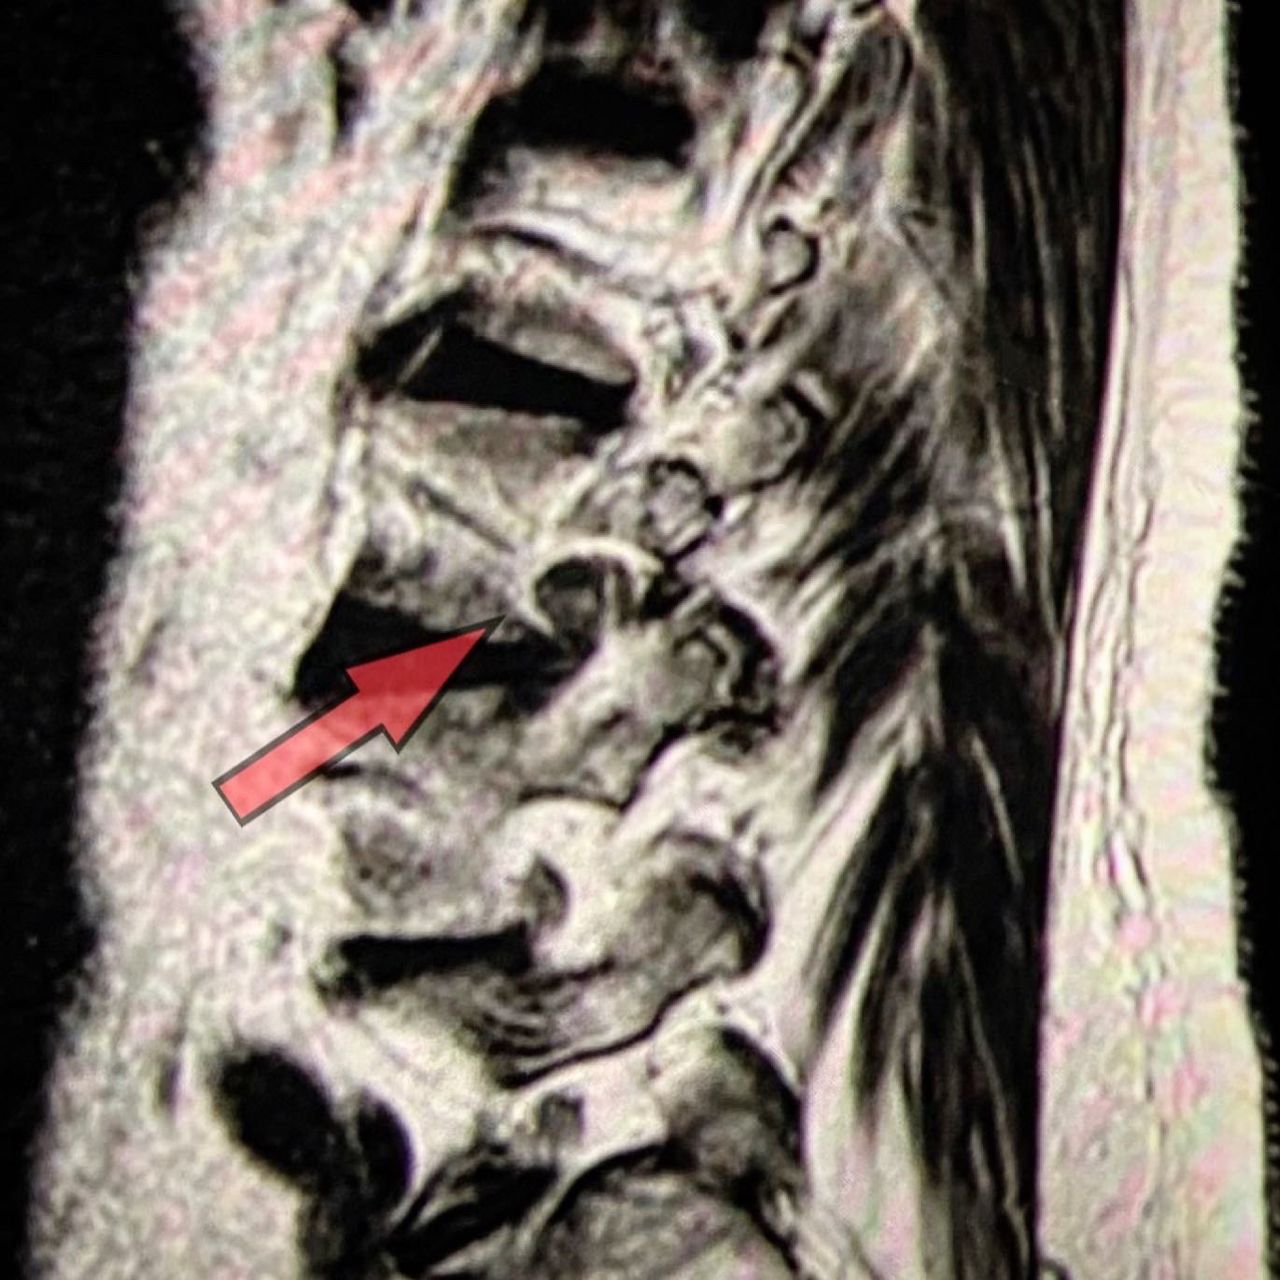 spine lumbar with red arrow